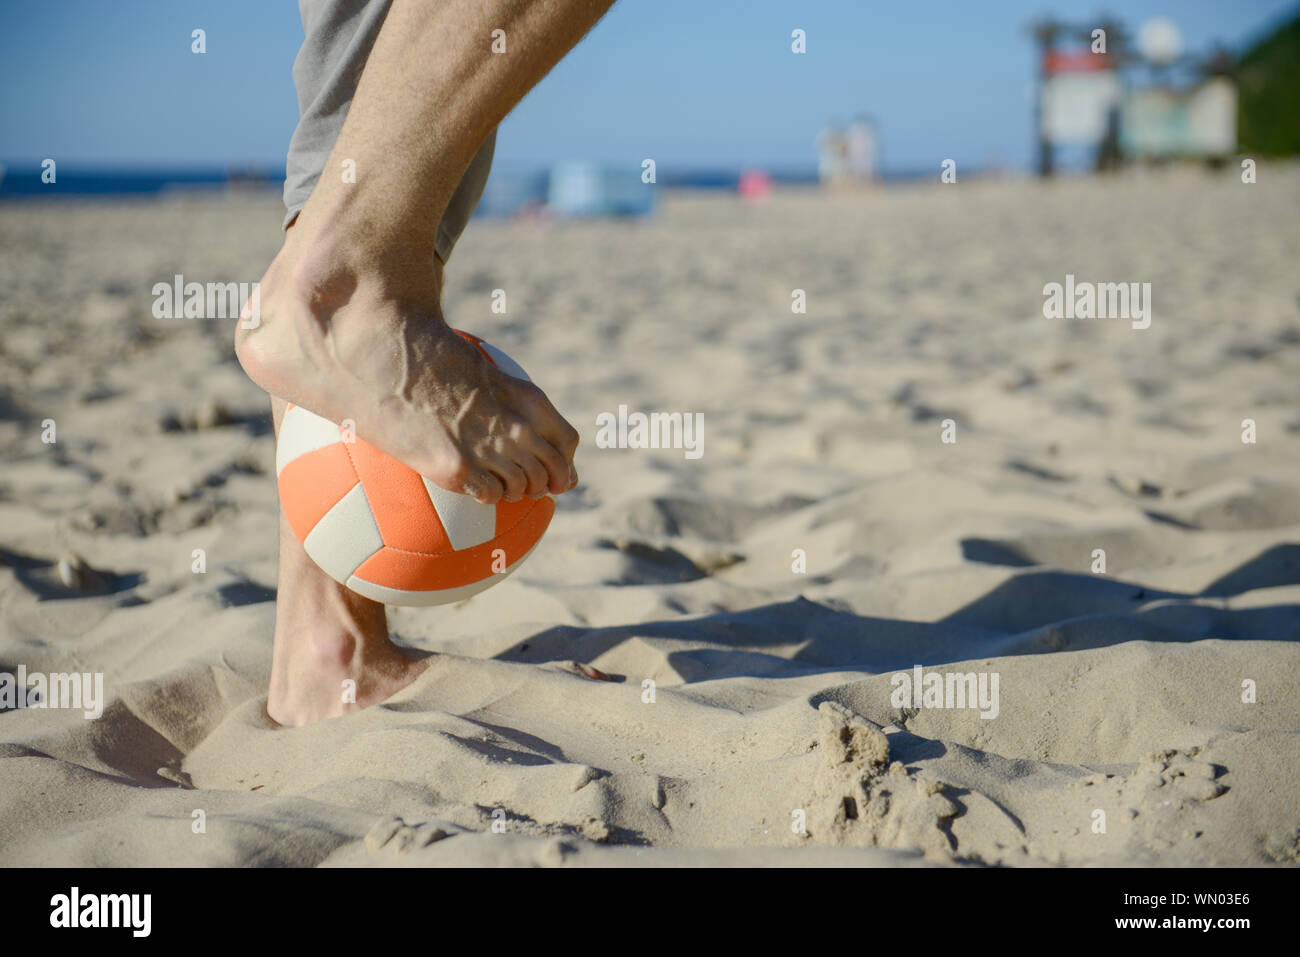 man playing soccer on beach with dribble skill and ball on vacation Stock Photo